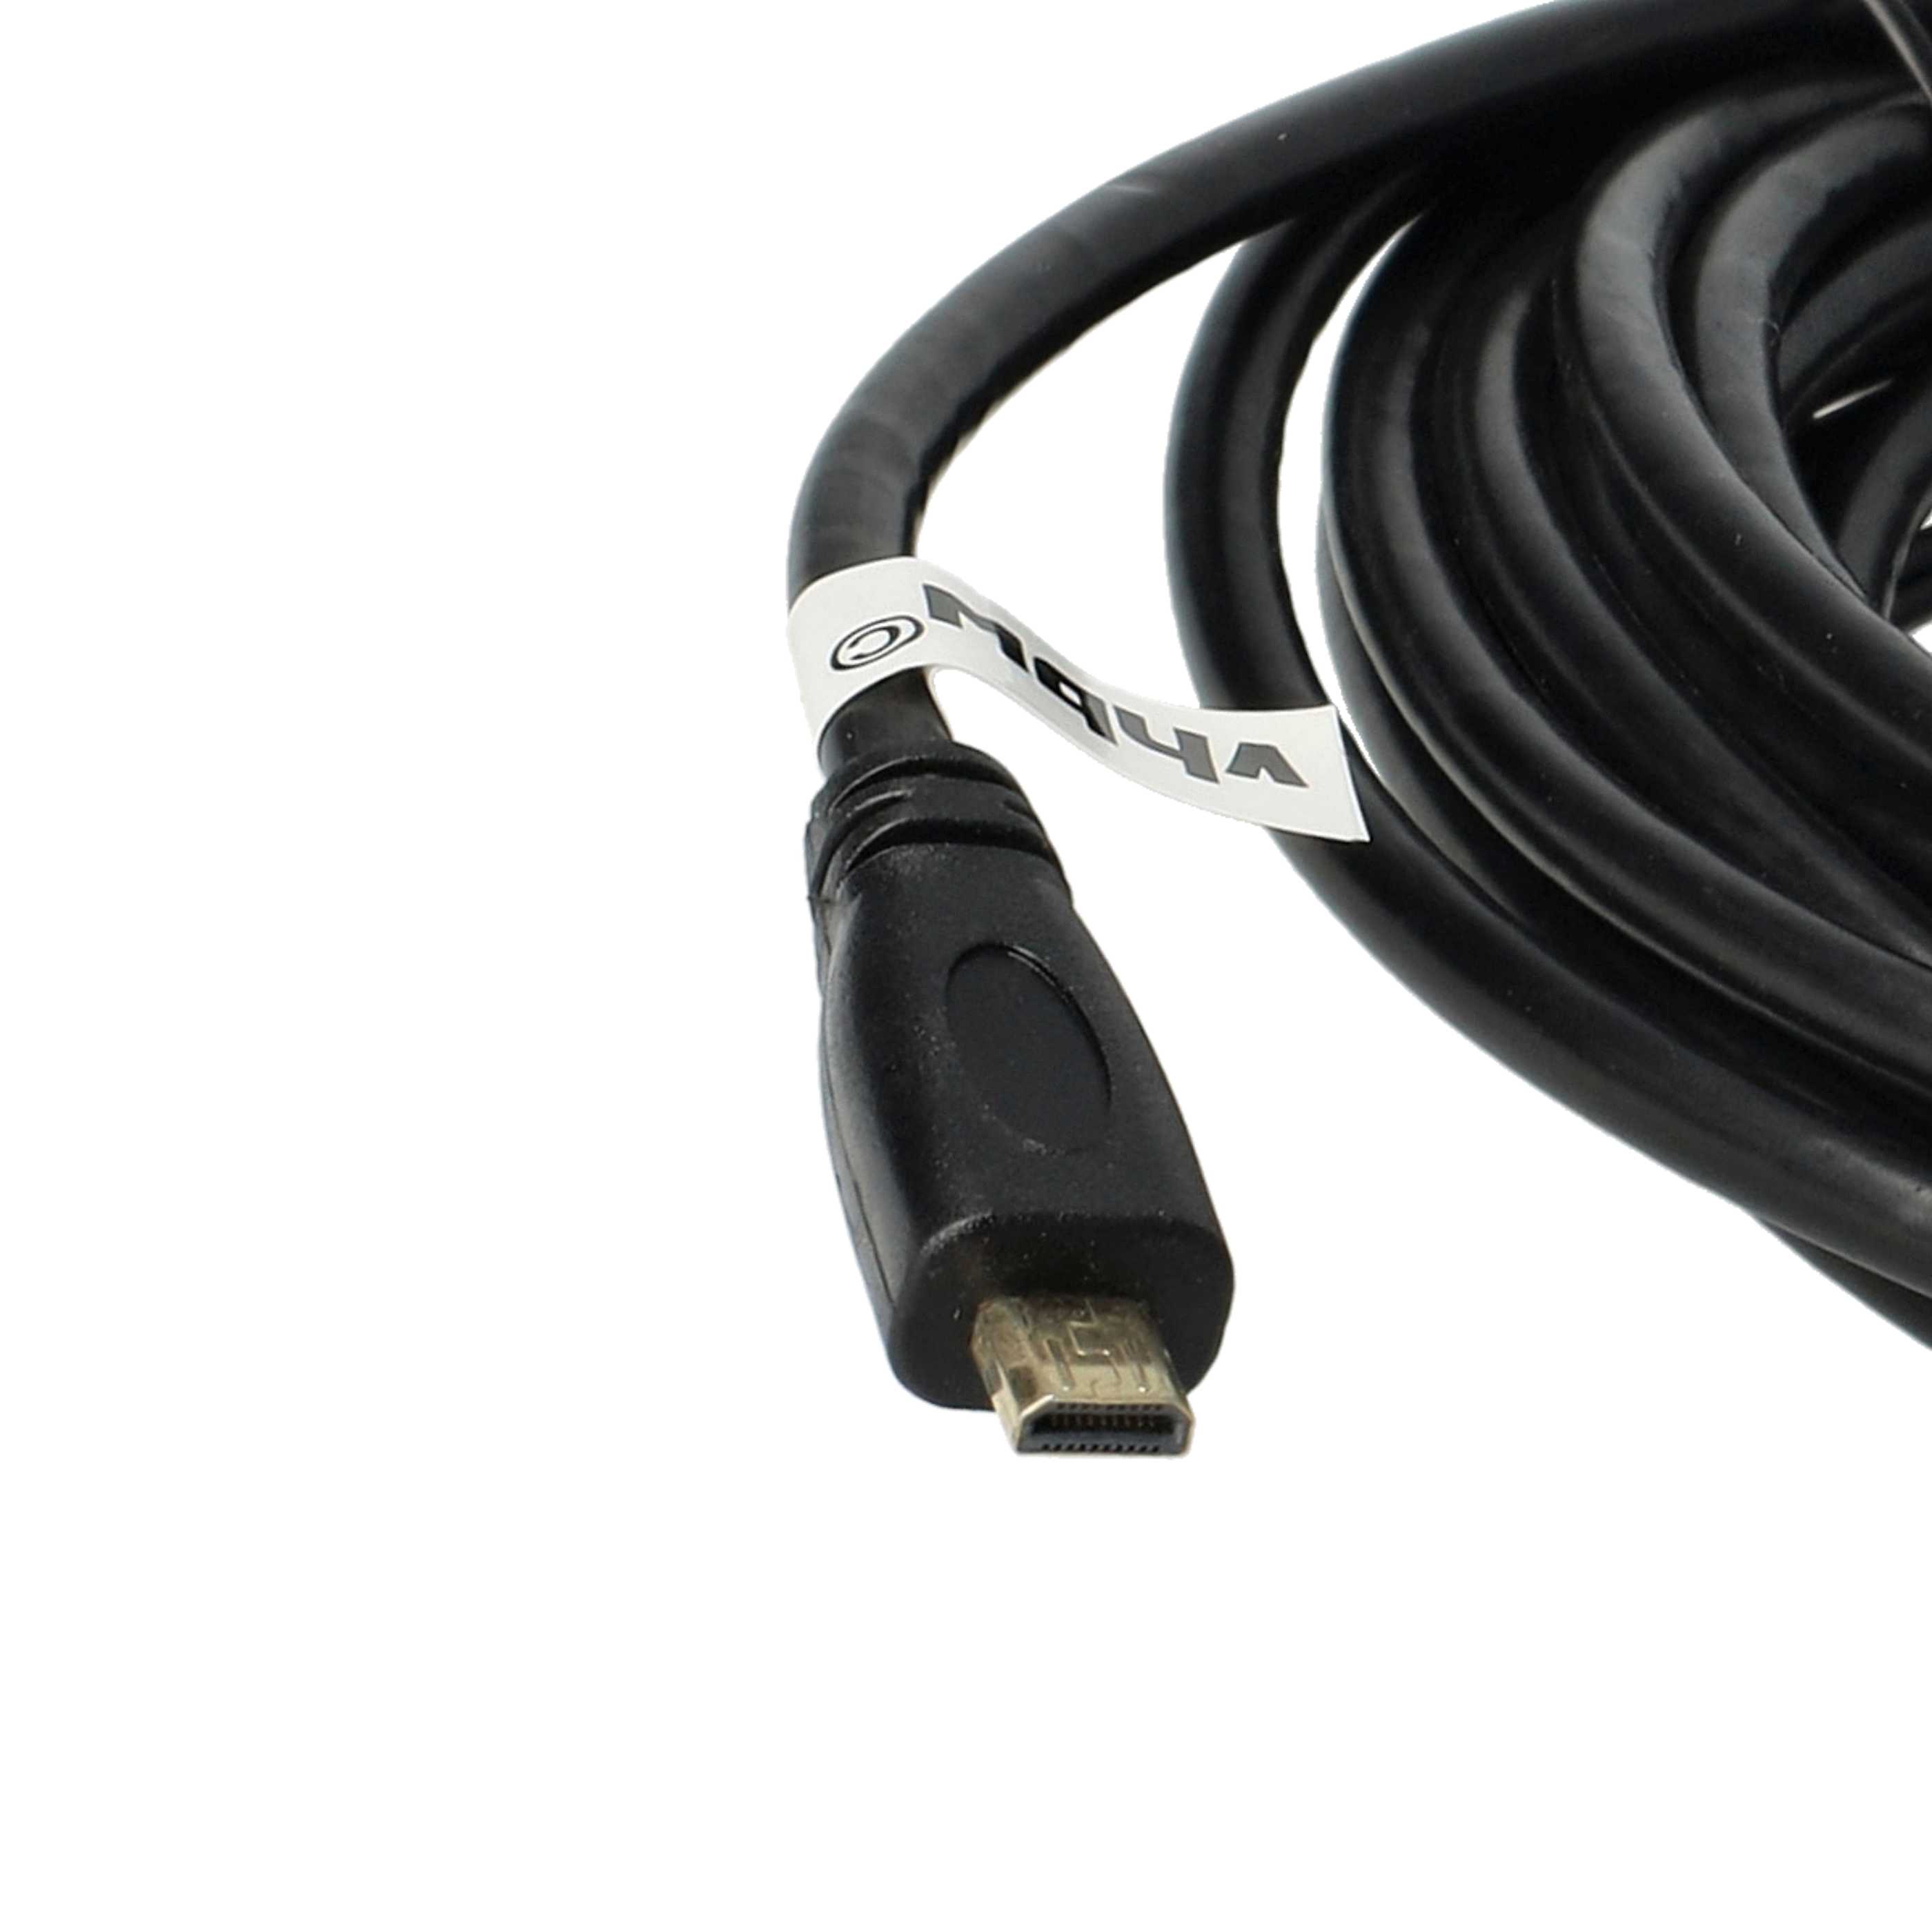 HDMI-Cable, Micro-HDMI to HDMI 1.4 5m for Tablet, Smartphone, Camera